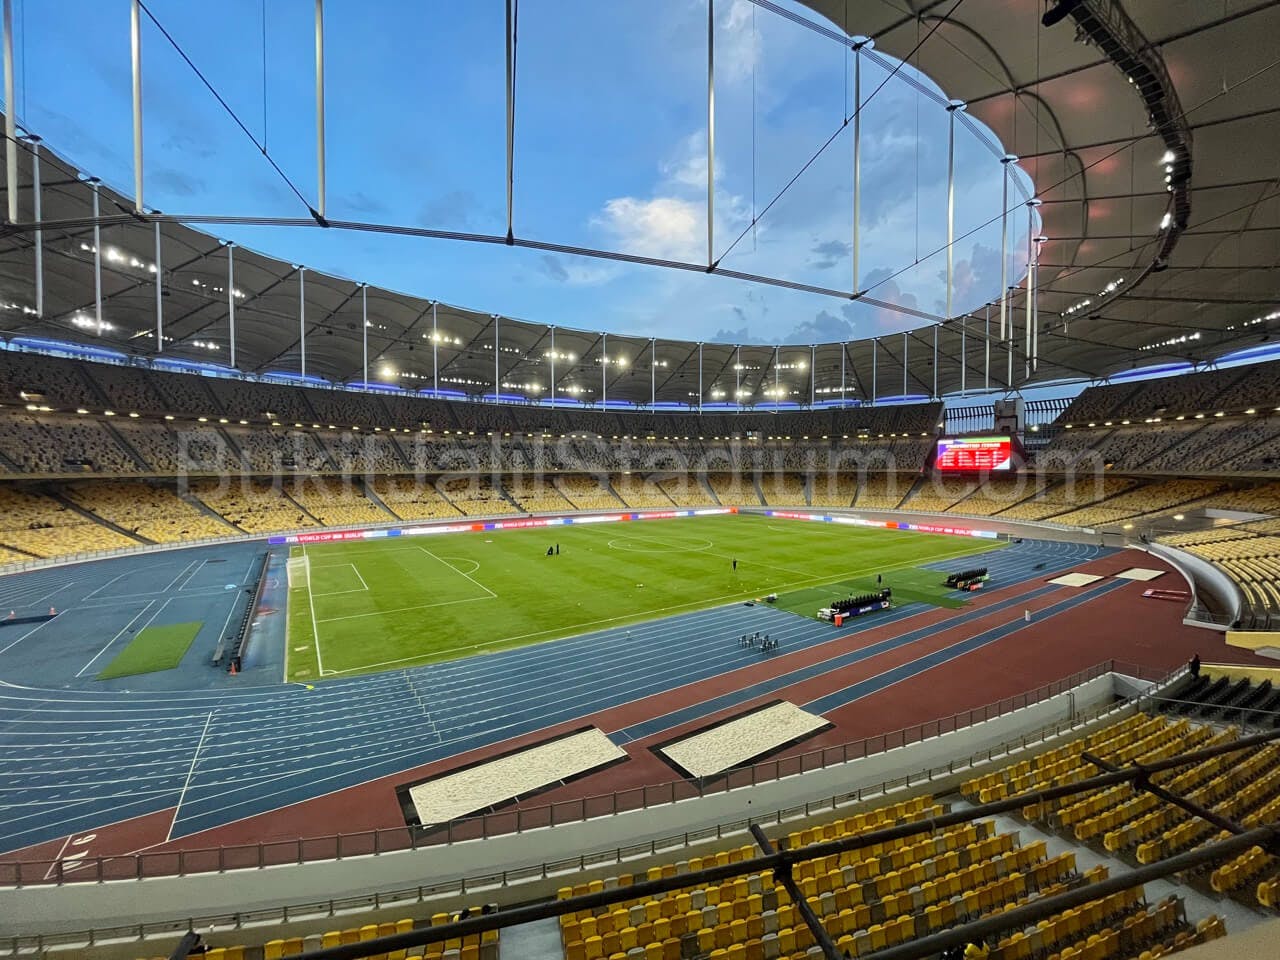 0.5x View of Bukit Jalil field from section 232 of Stadium Bukit Jalil.